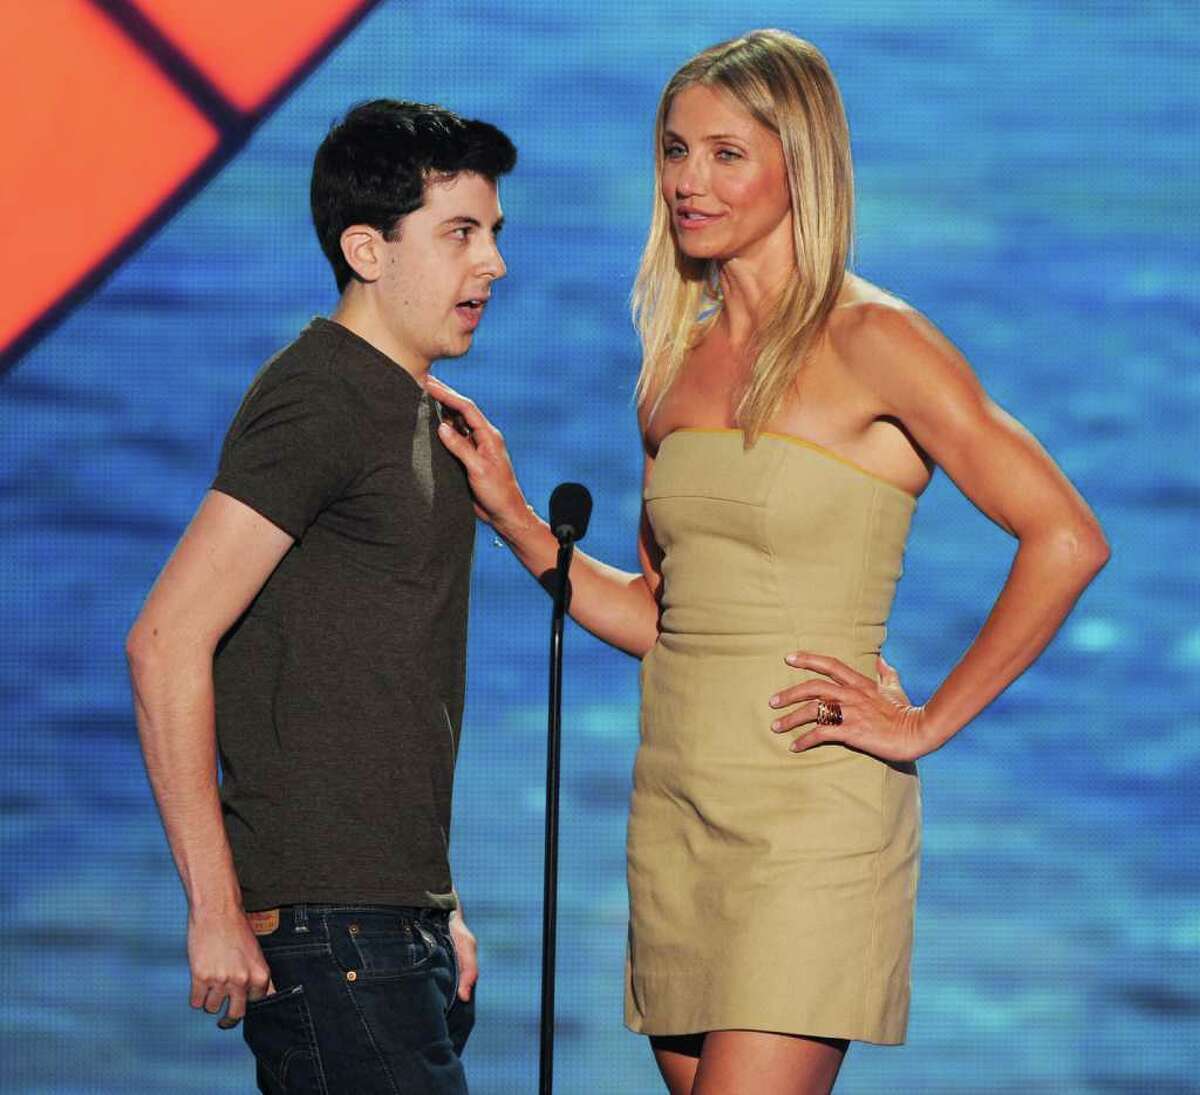 Actor Christopher Mintz-Plasse (L) and actress Cameron Diaz speak onstage during the 2011 Teen Choice Awards held at the Gibson Amphitheatre in Universal City, California.